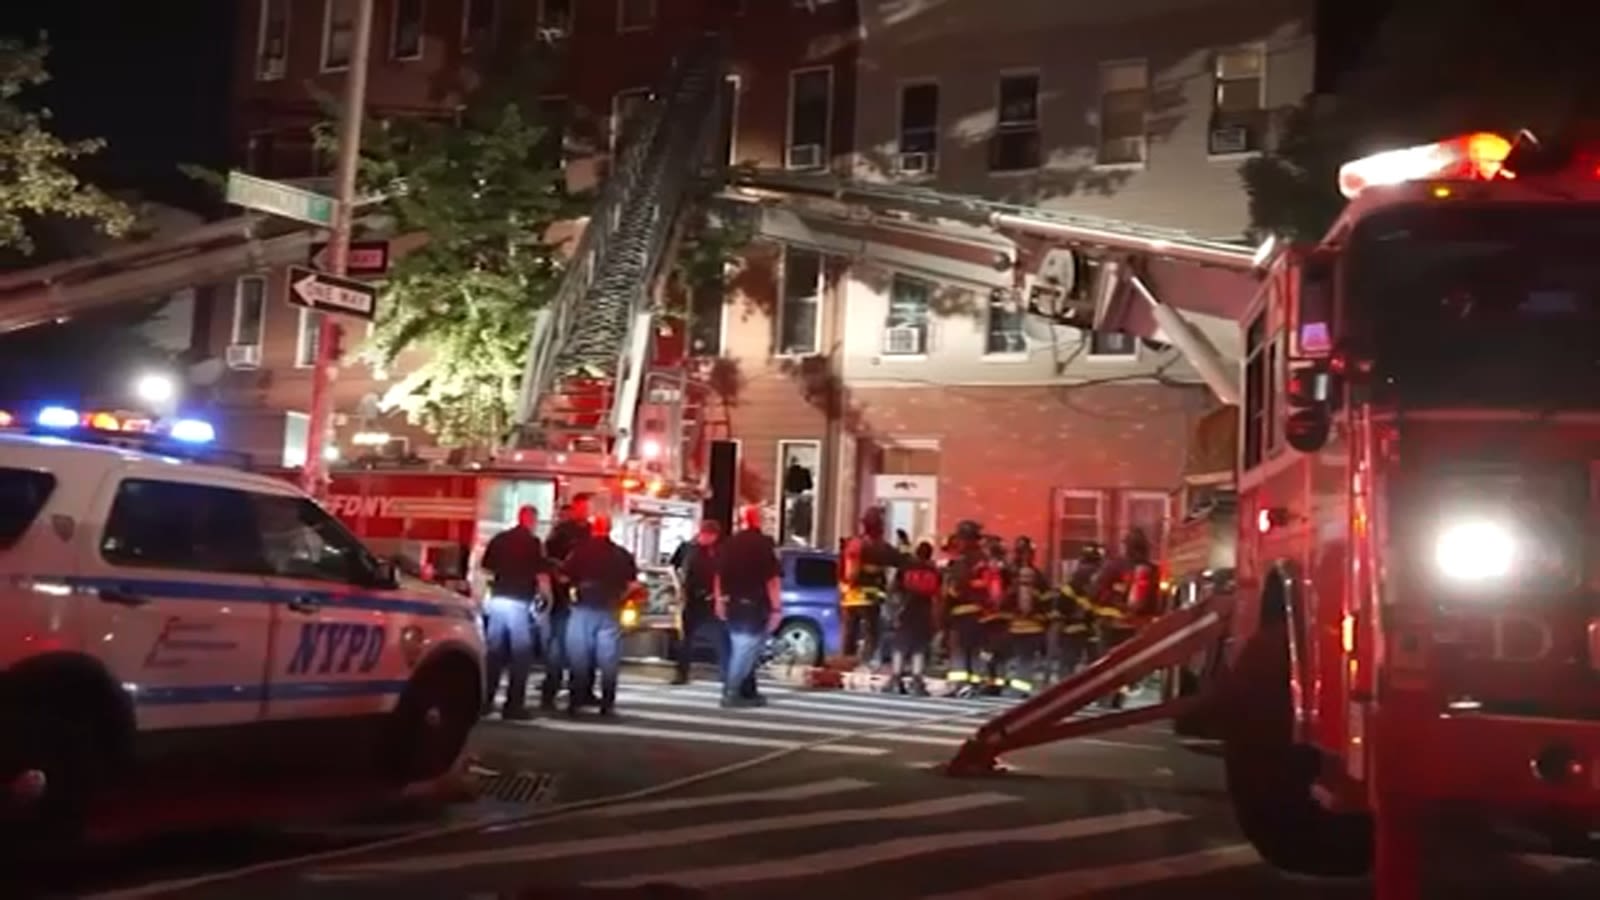 Arson suspect tried to prevent residents from escaping Brooklyn fire: source